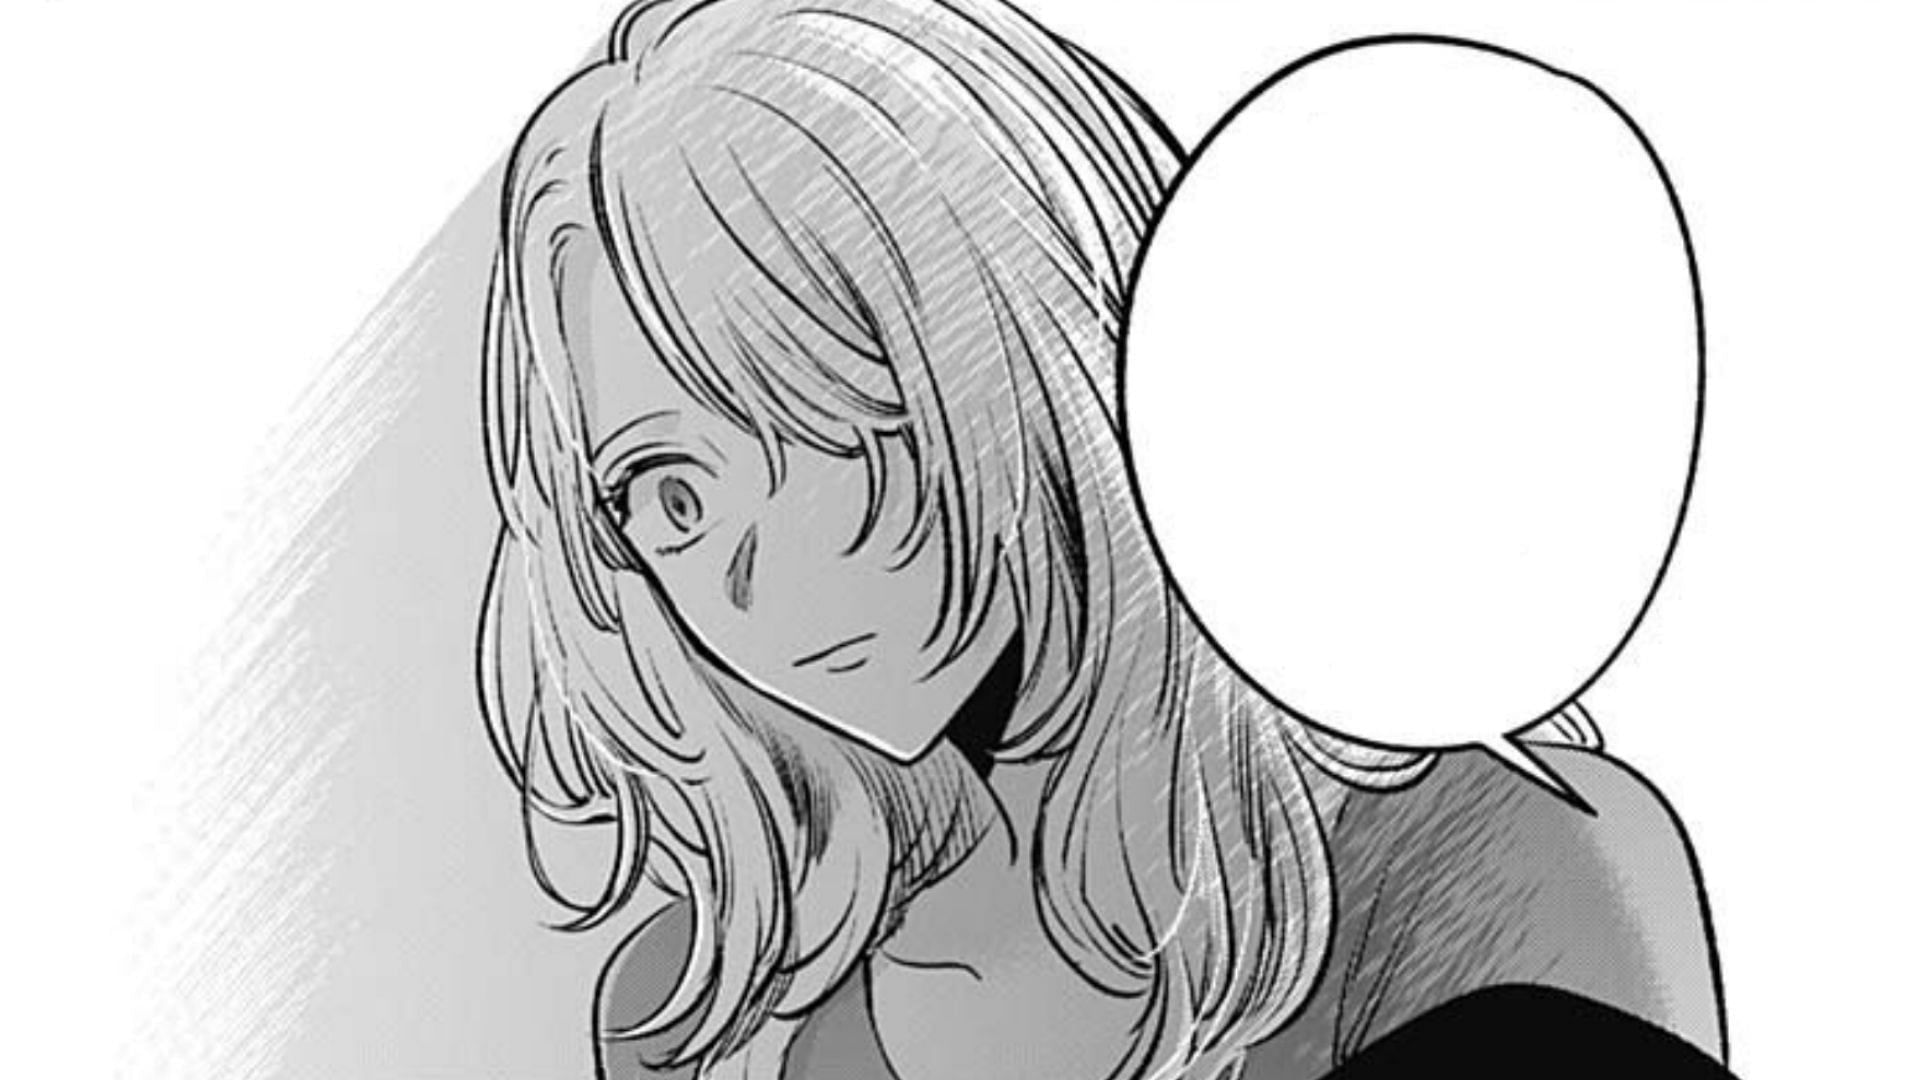 Oshi no Ko chapter 126: Aqua's ploy forces former President to